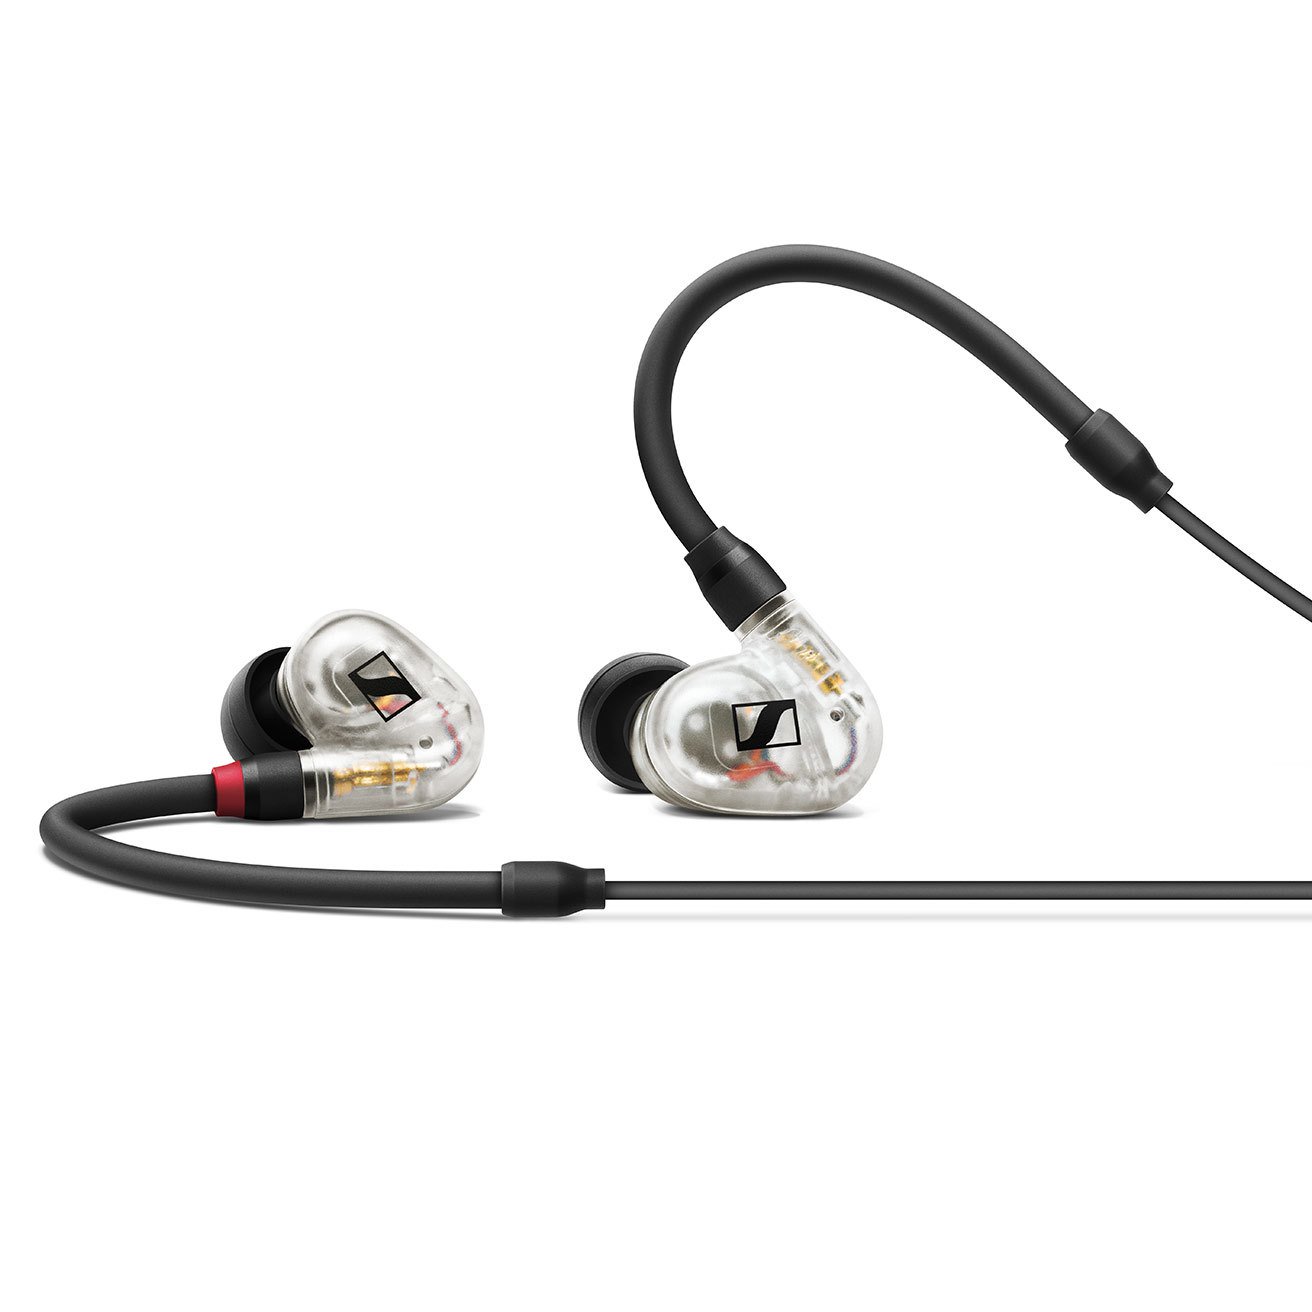 Sennheiser Ie 40 Pro Clear - Ecouteur Intra-auriculaire - Variation 1